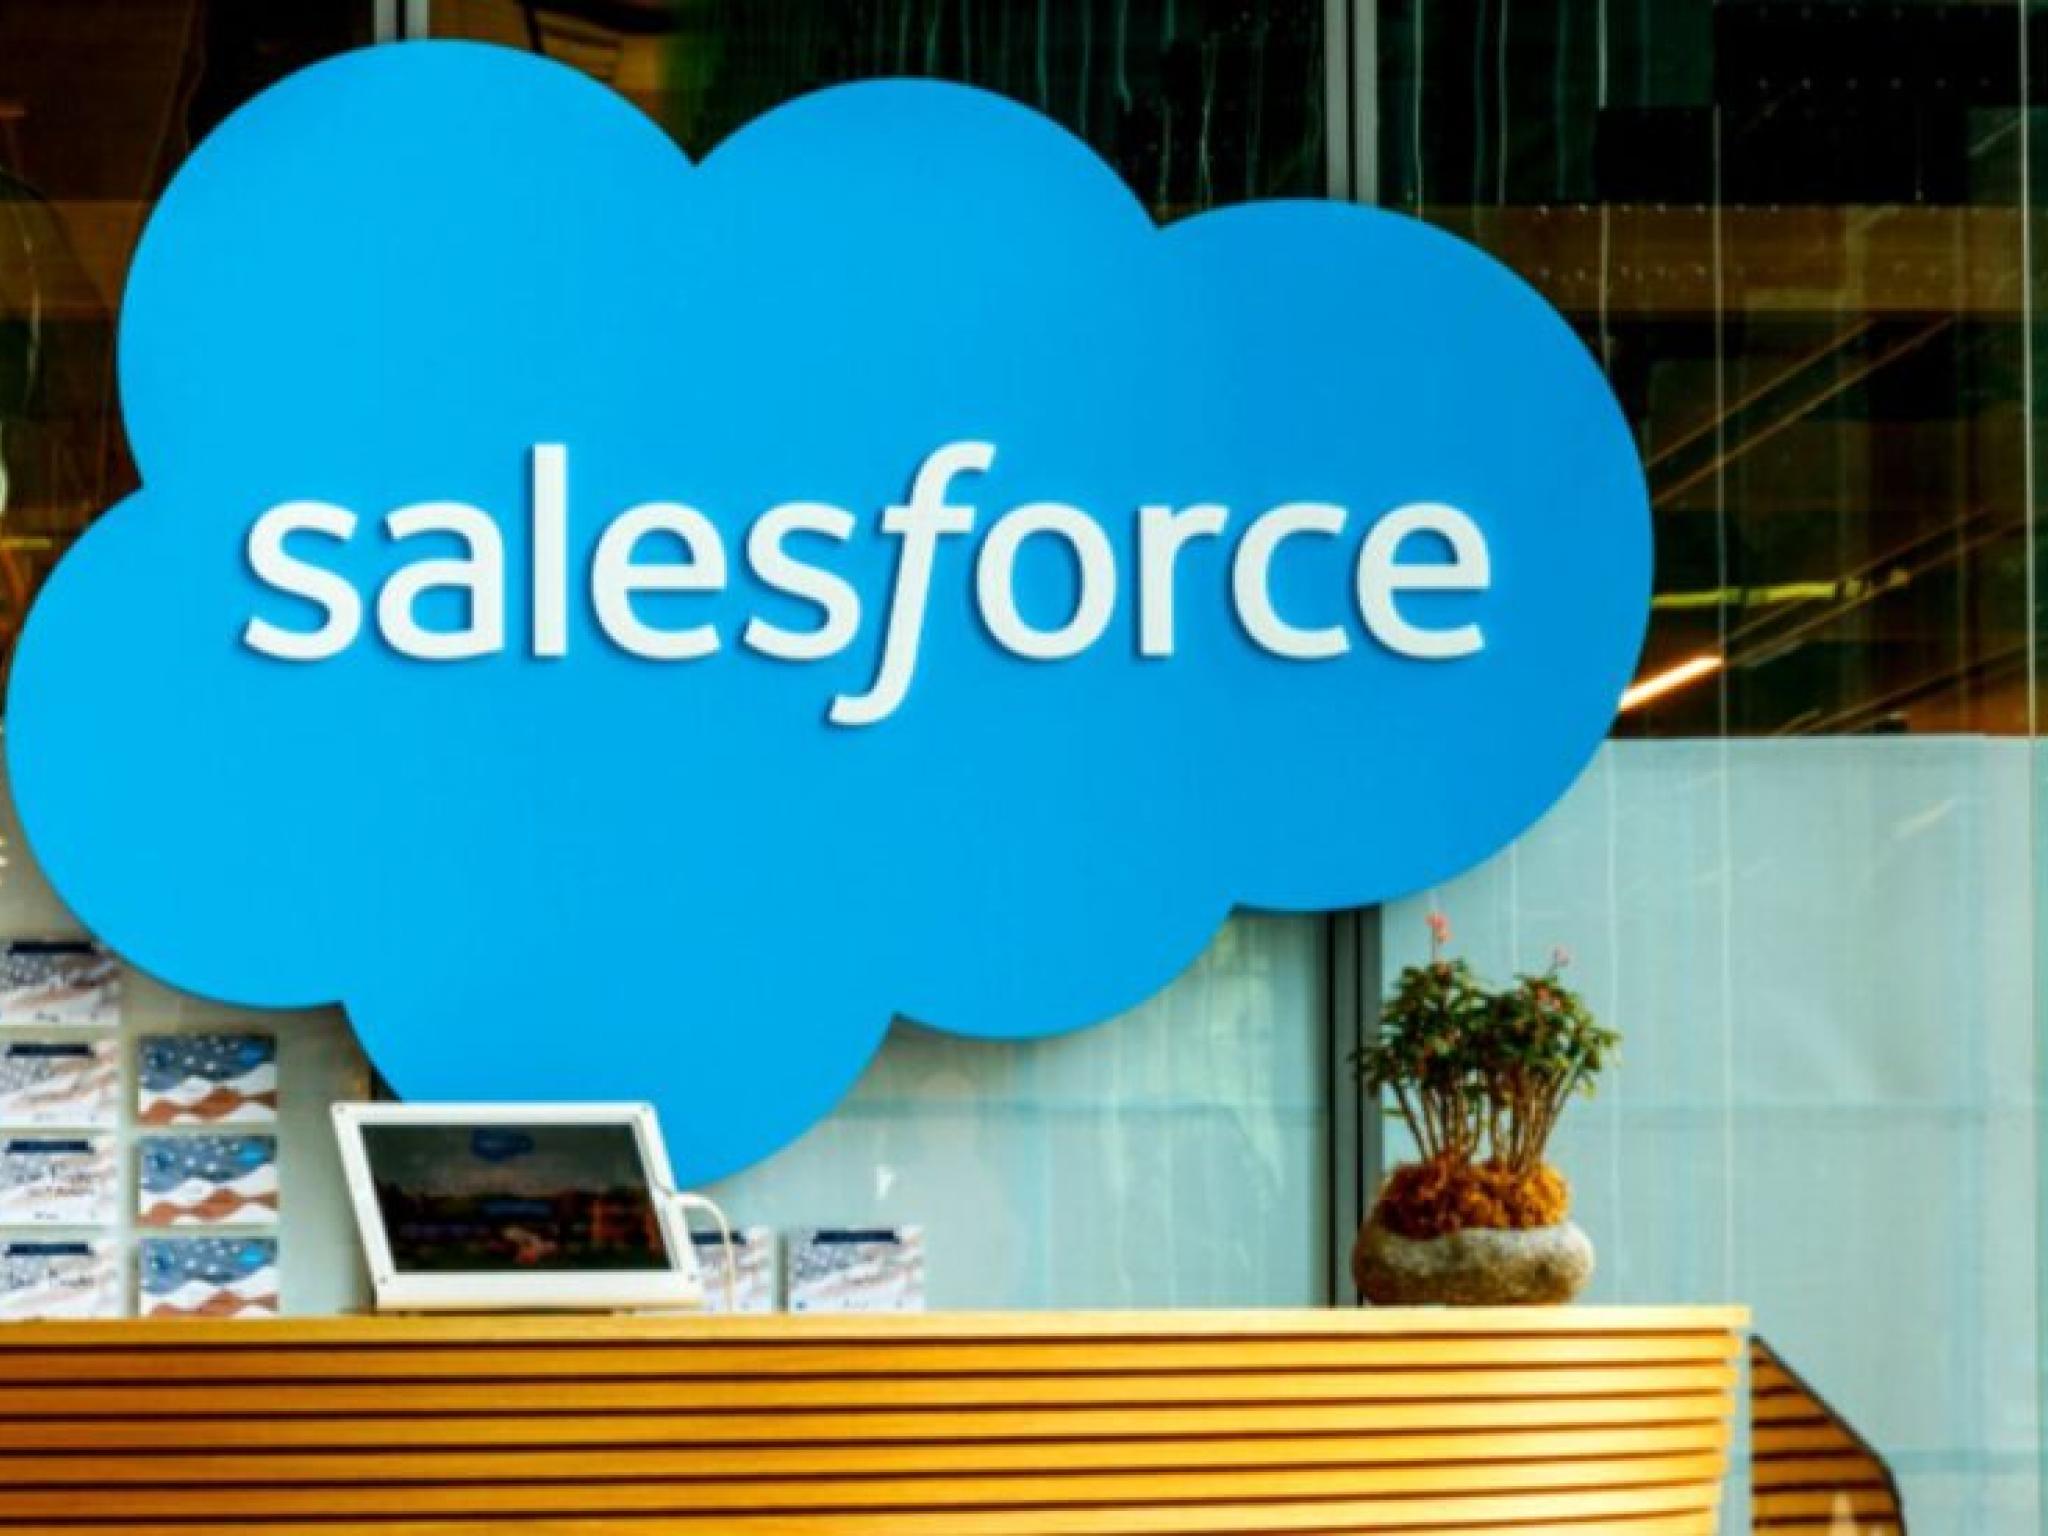  salesforce-integrates-ai-tools-investors-watch-for-revenue-impact-bloomberg 